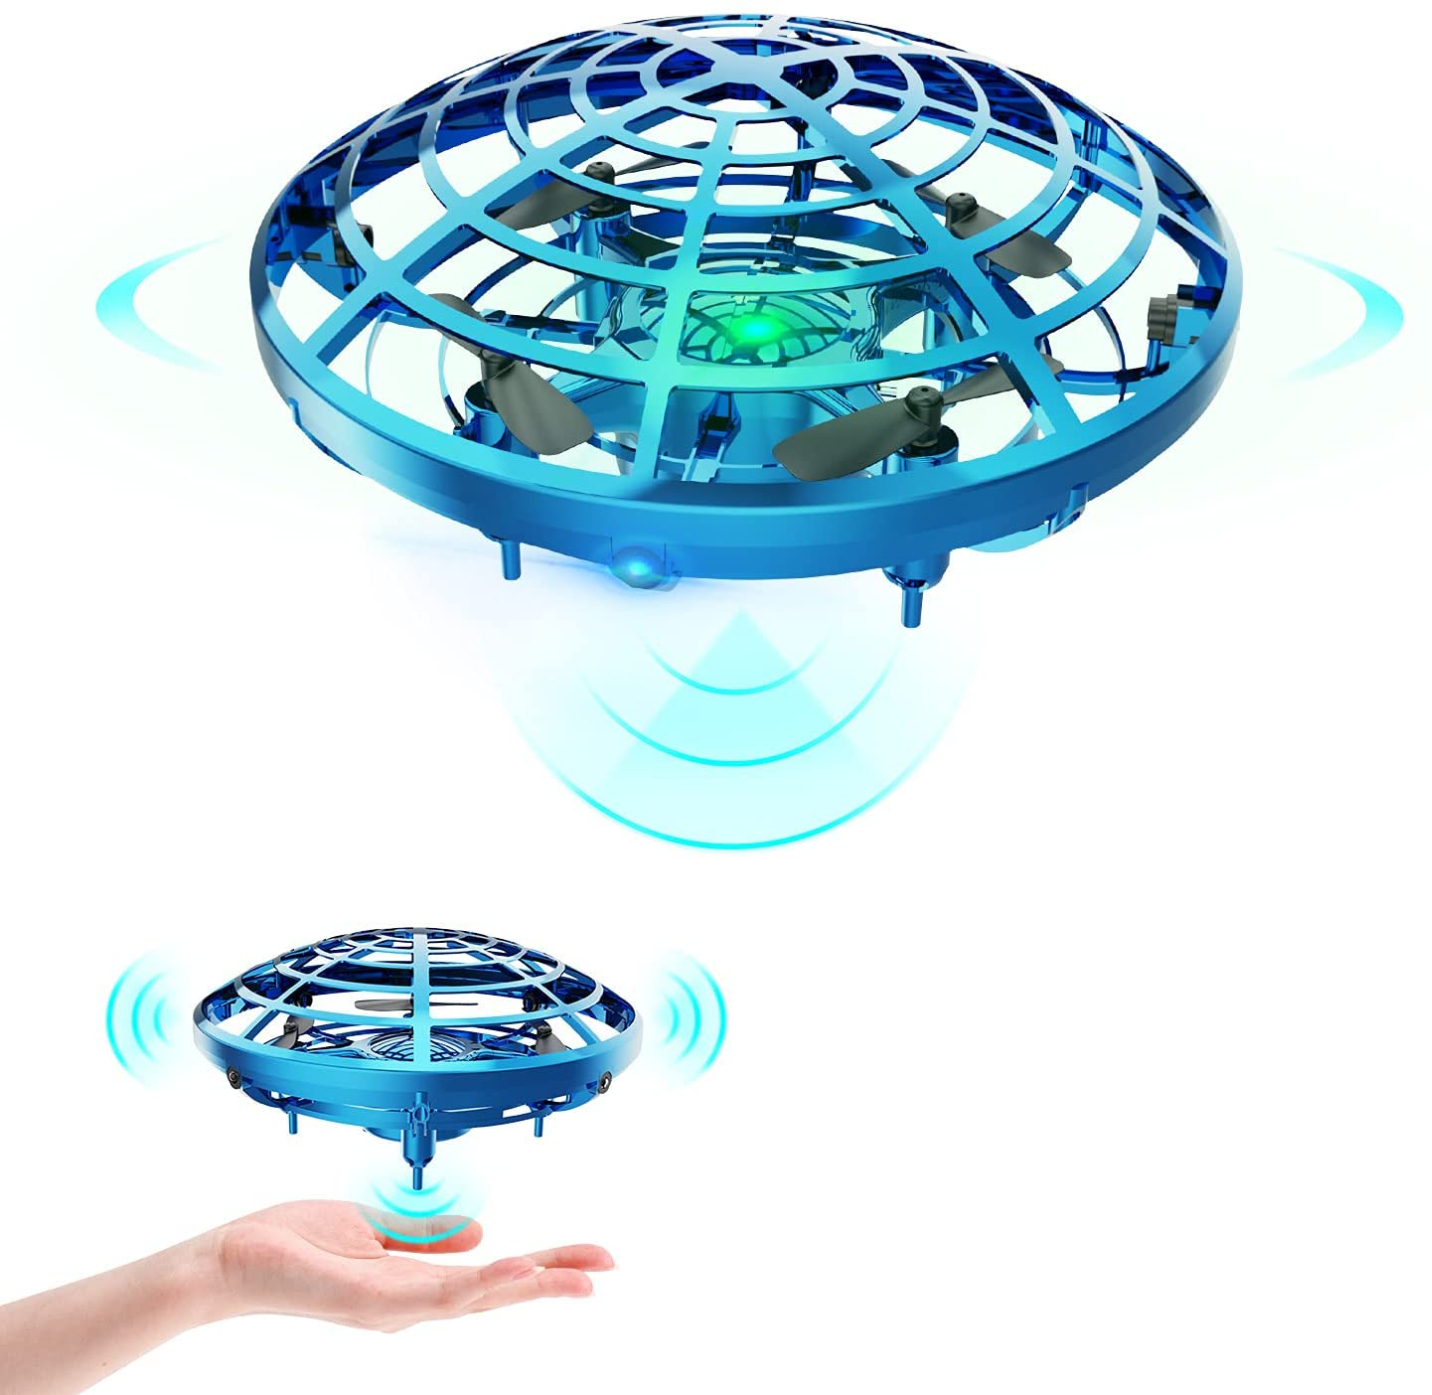 Tospin RC Flying Toys flying ball ufo Hand Controlled Drone with LED Light Induction Remote Control for Kids Boys Girls Birthday Gift